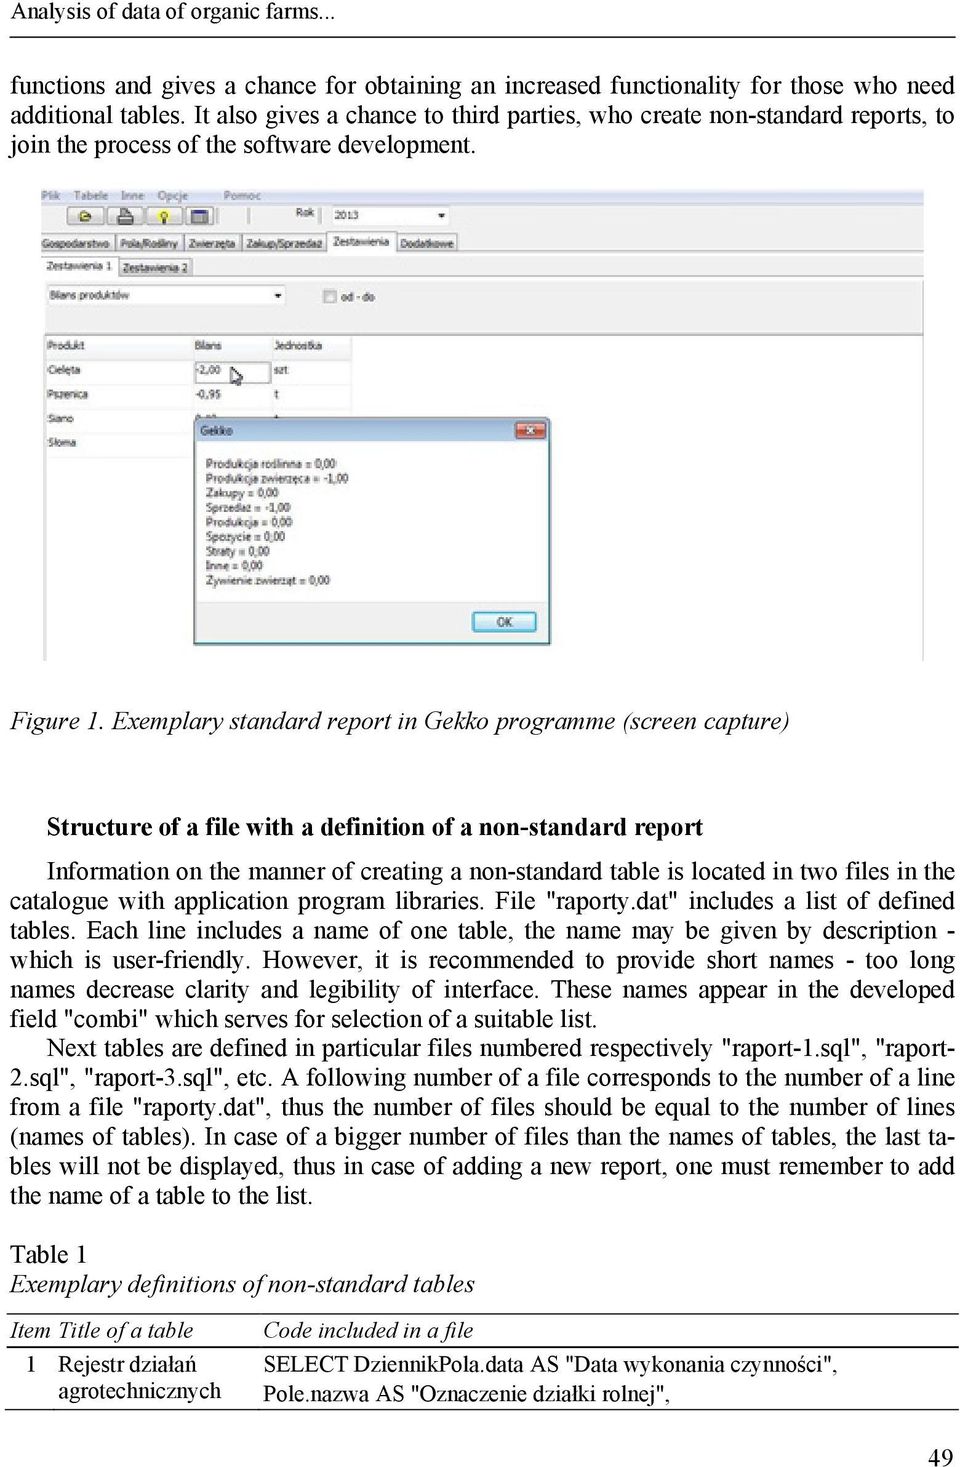 Exemplary standard report in Gekko programme (screen capture) Structure of a file with a definition of a non-standard report Information on the manner of creating a non-standard table is located in